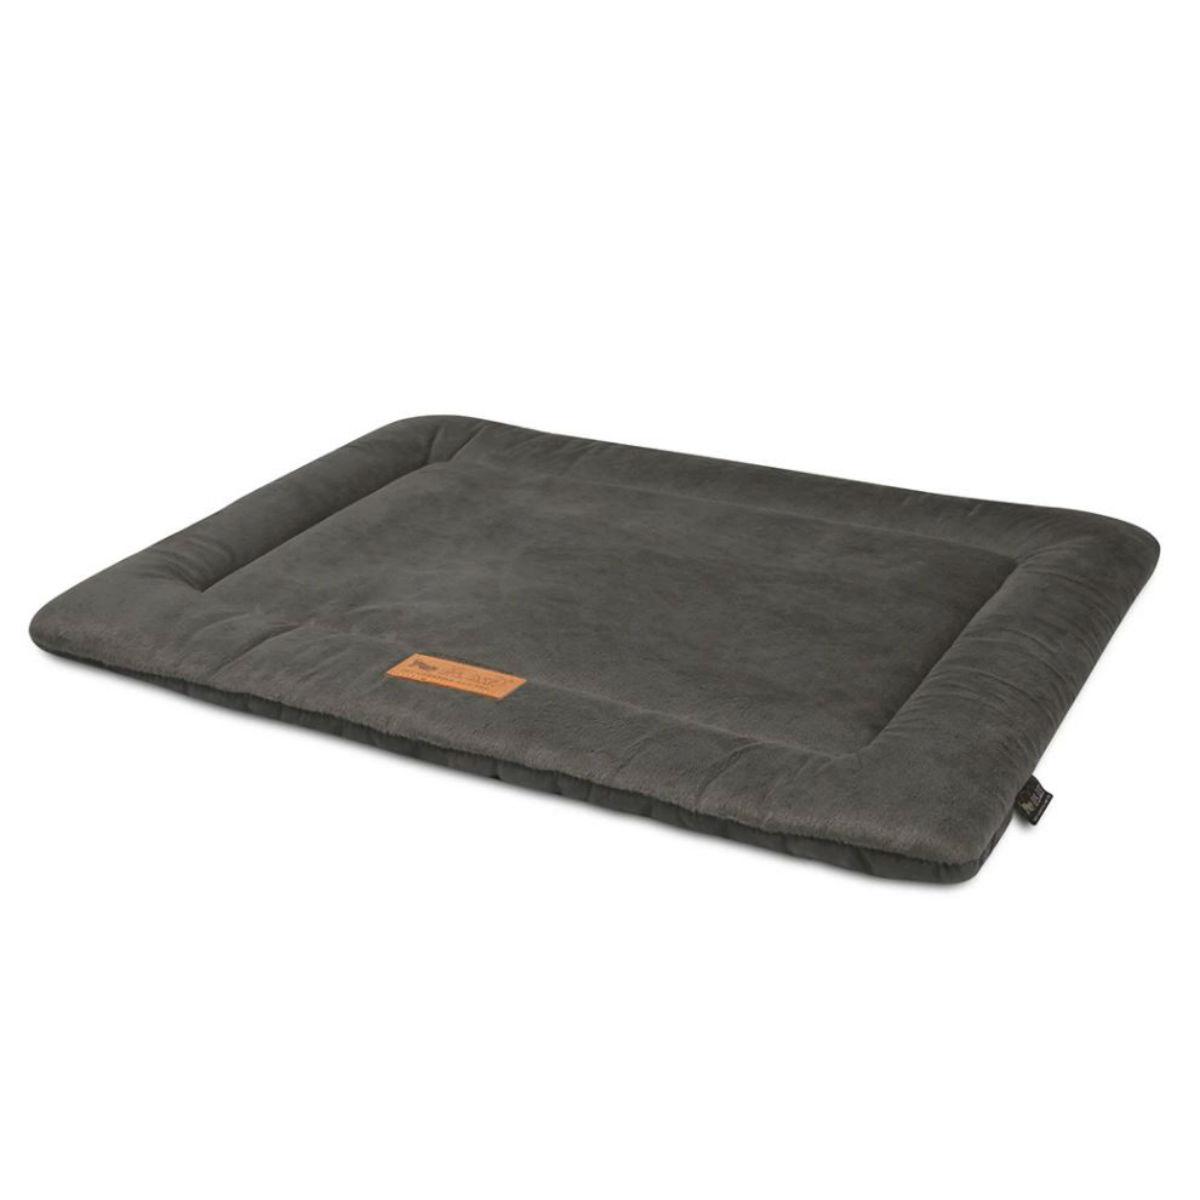 P.L.A.Y. Chill Pad Dog Bed - Anchor